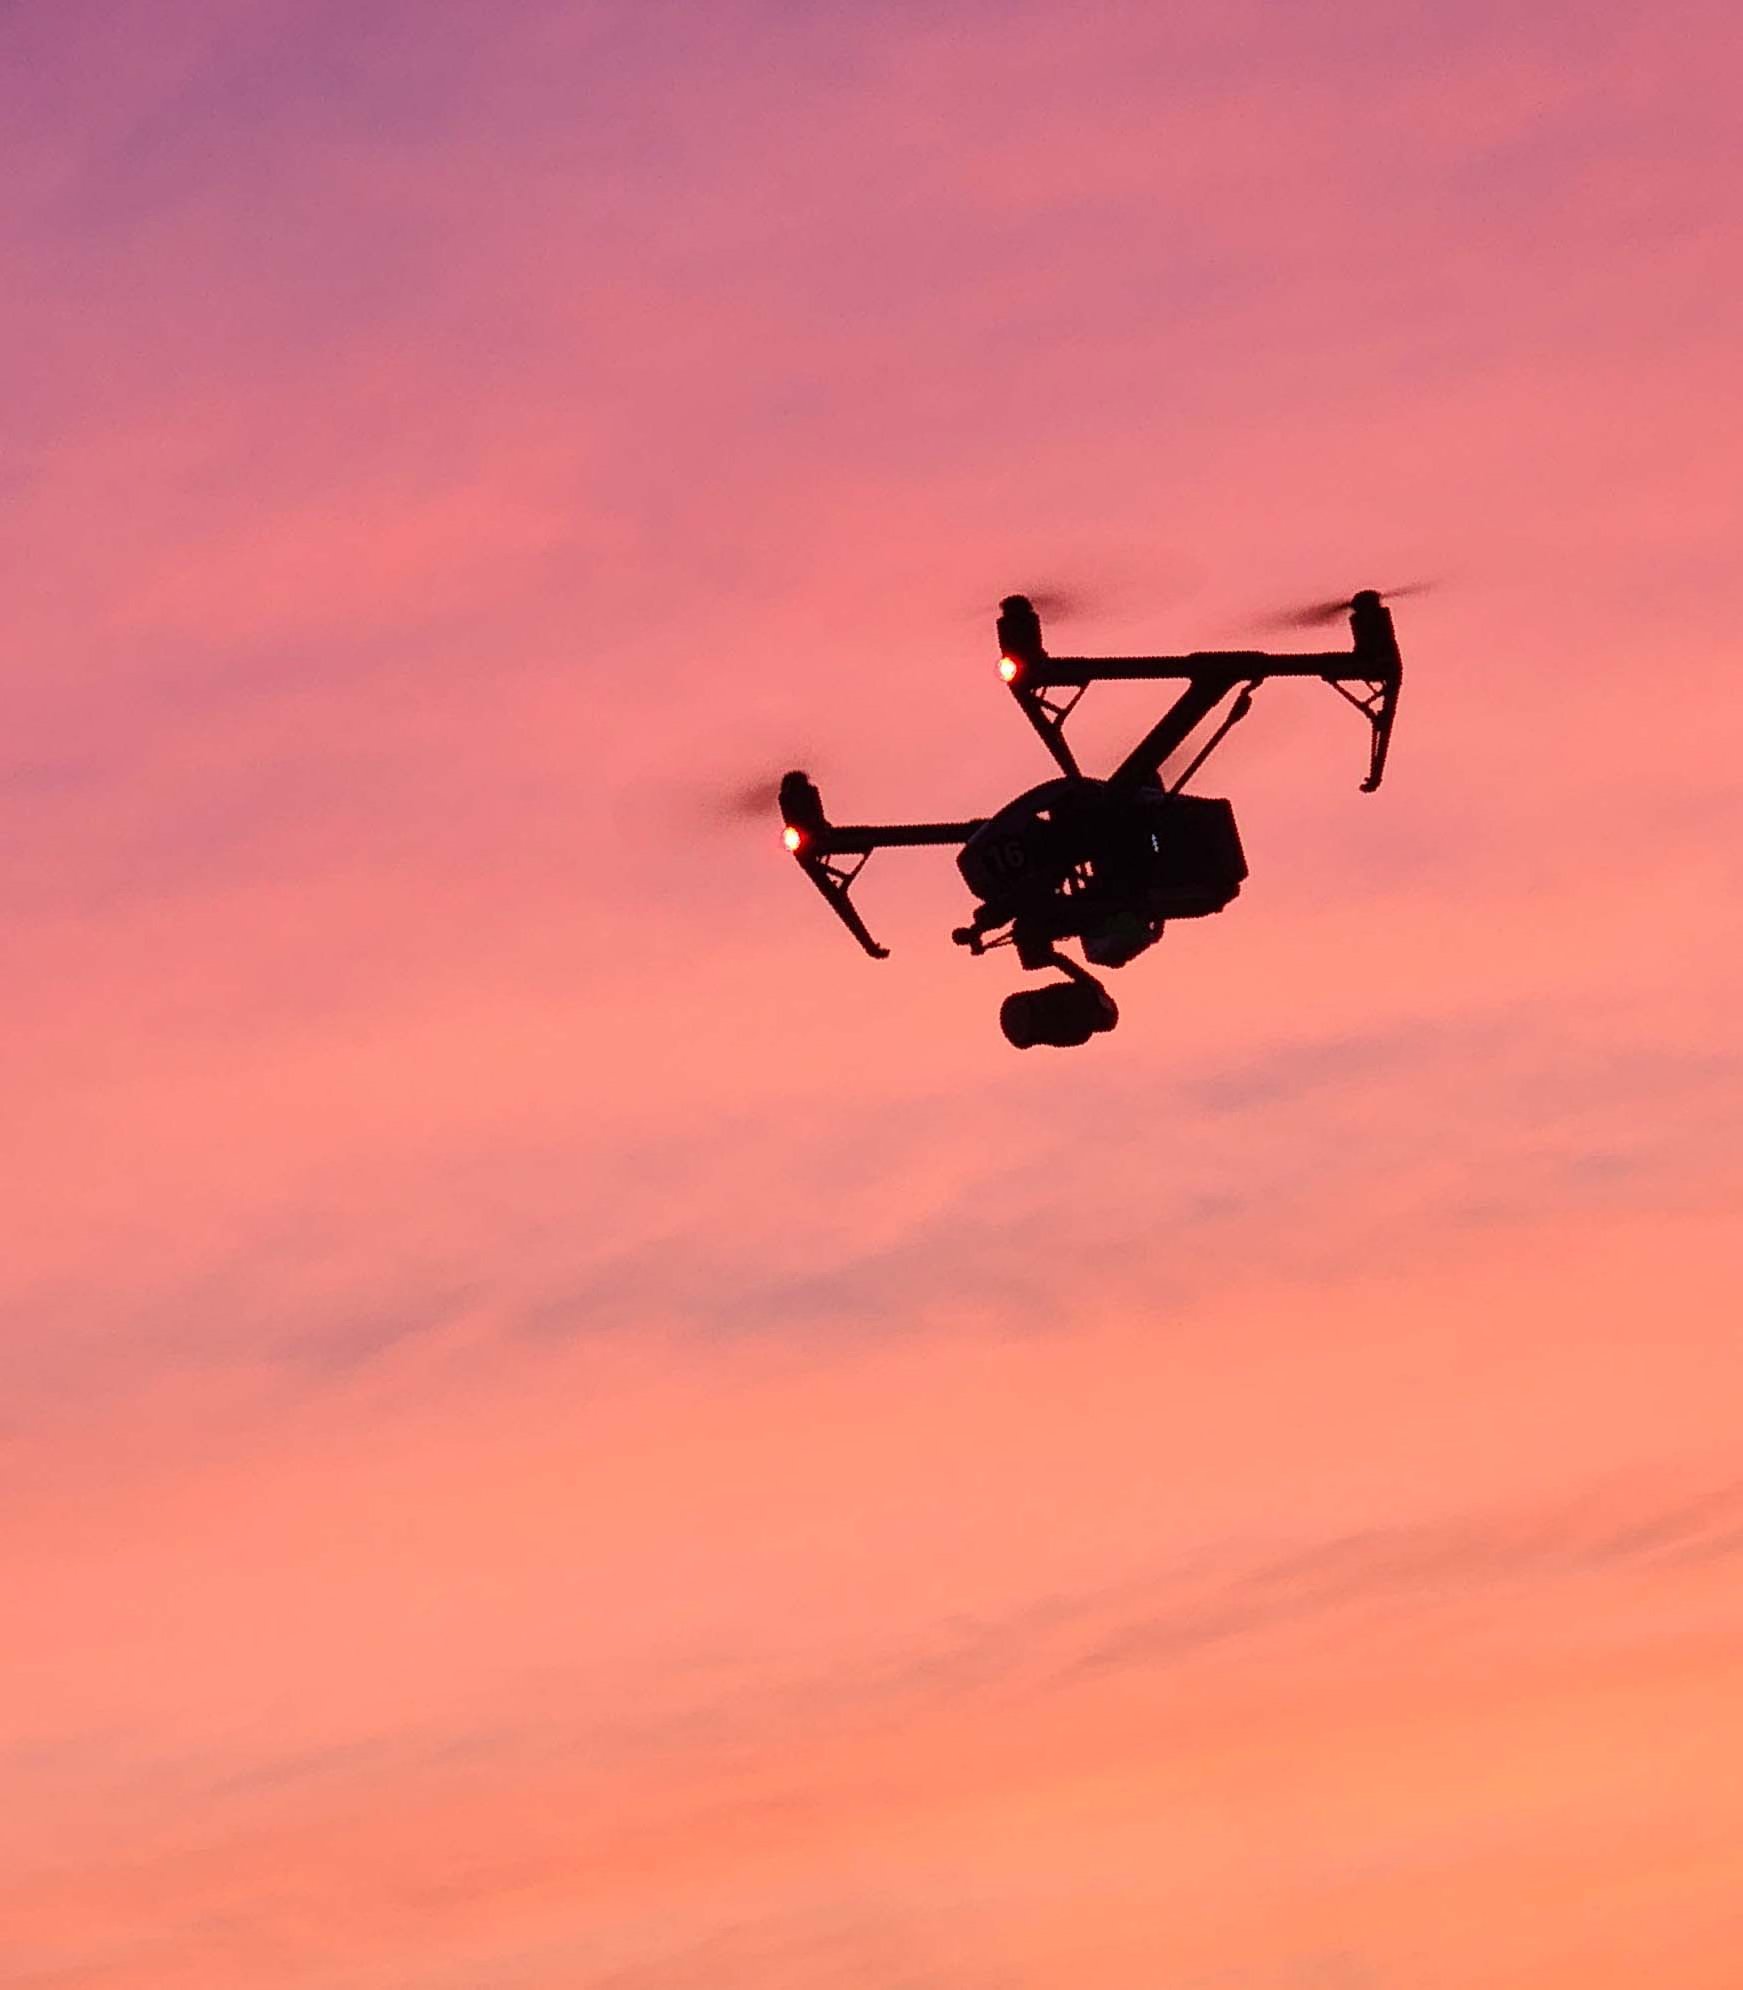 Drone soaring against the sunset sky, capturing aerial views.